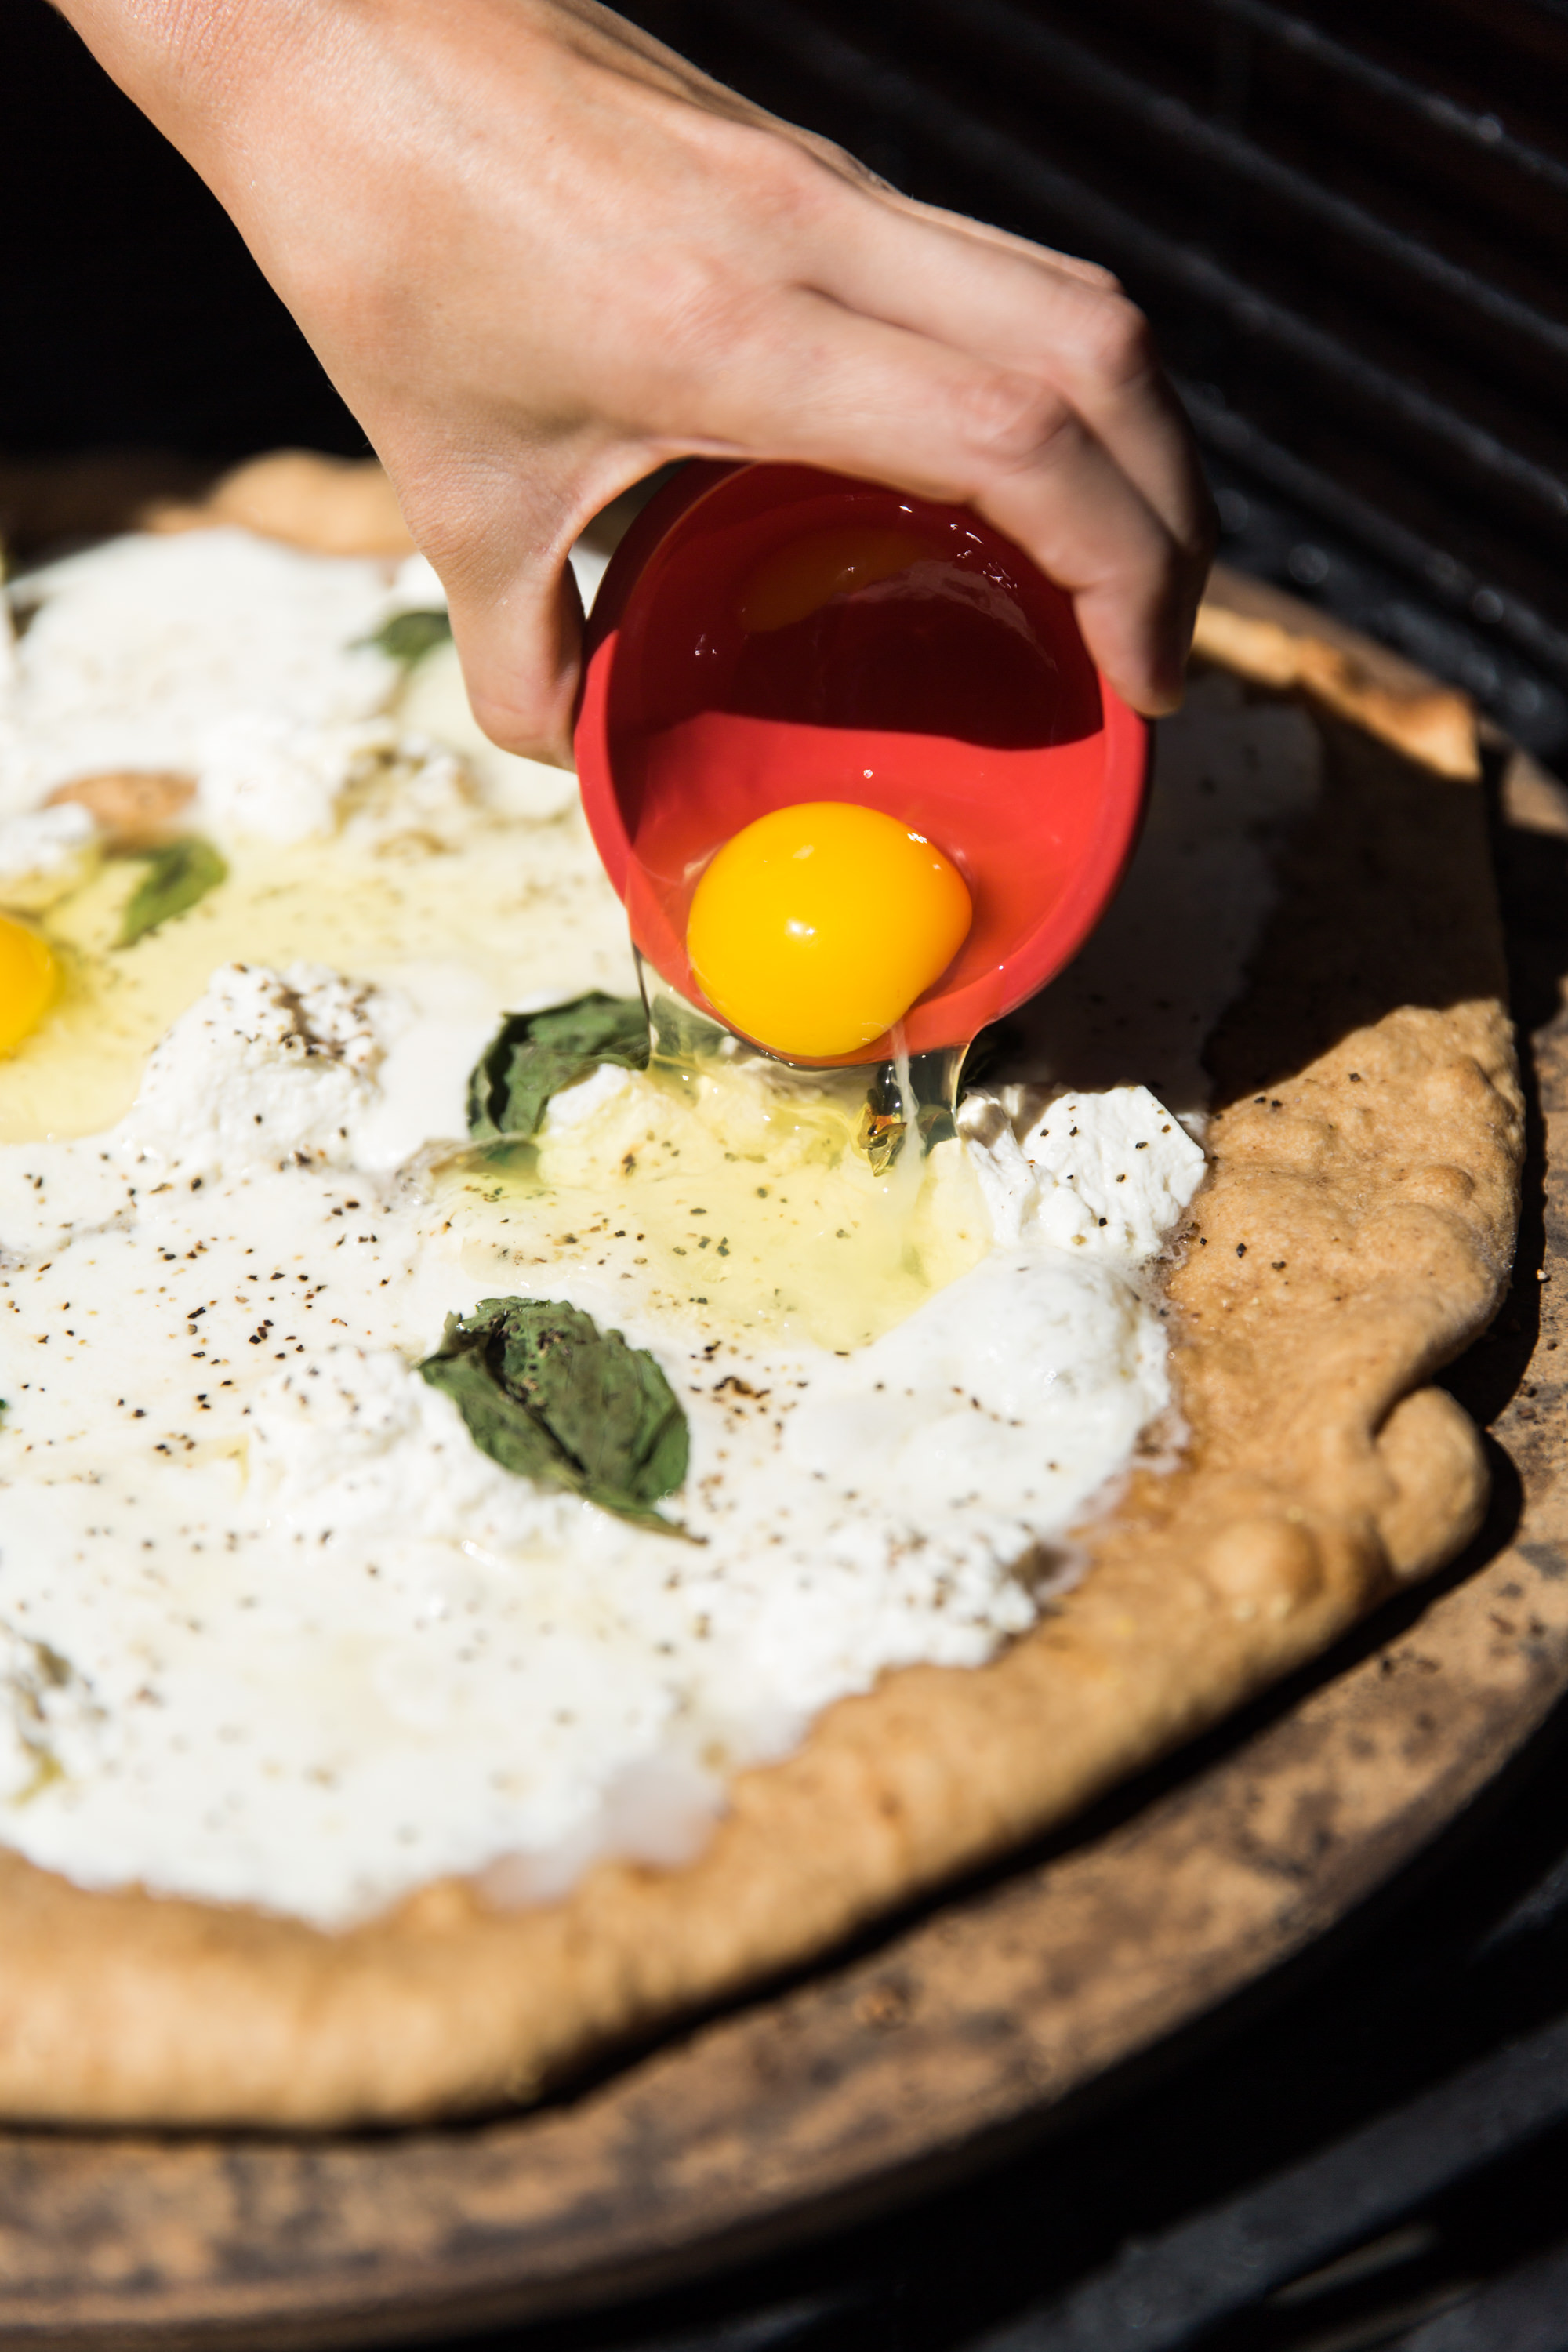 Topping Pizza With Egg